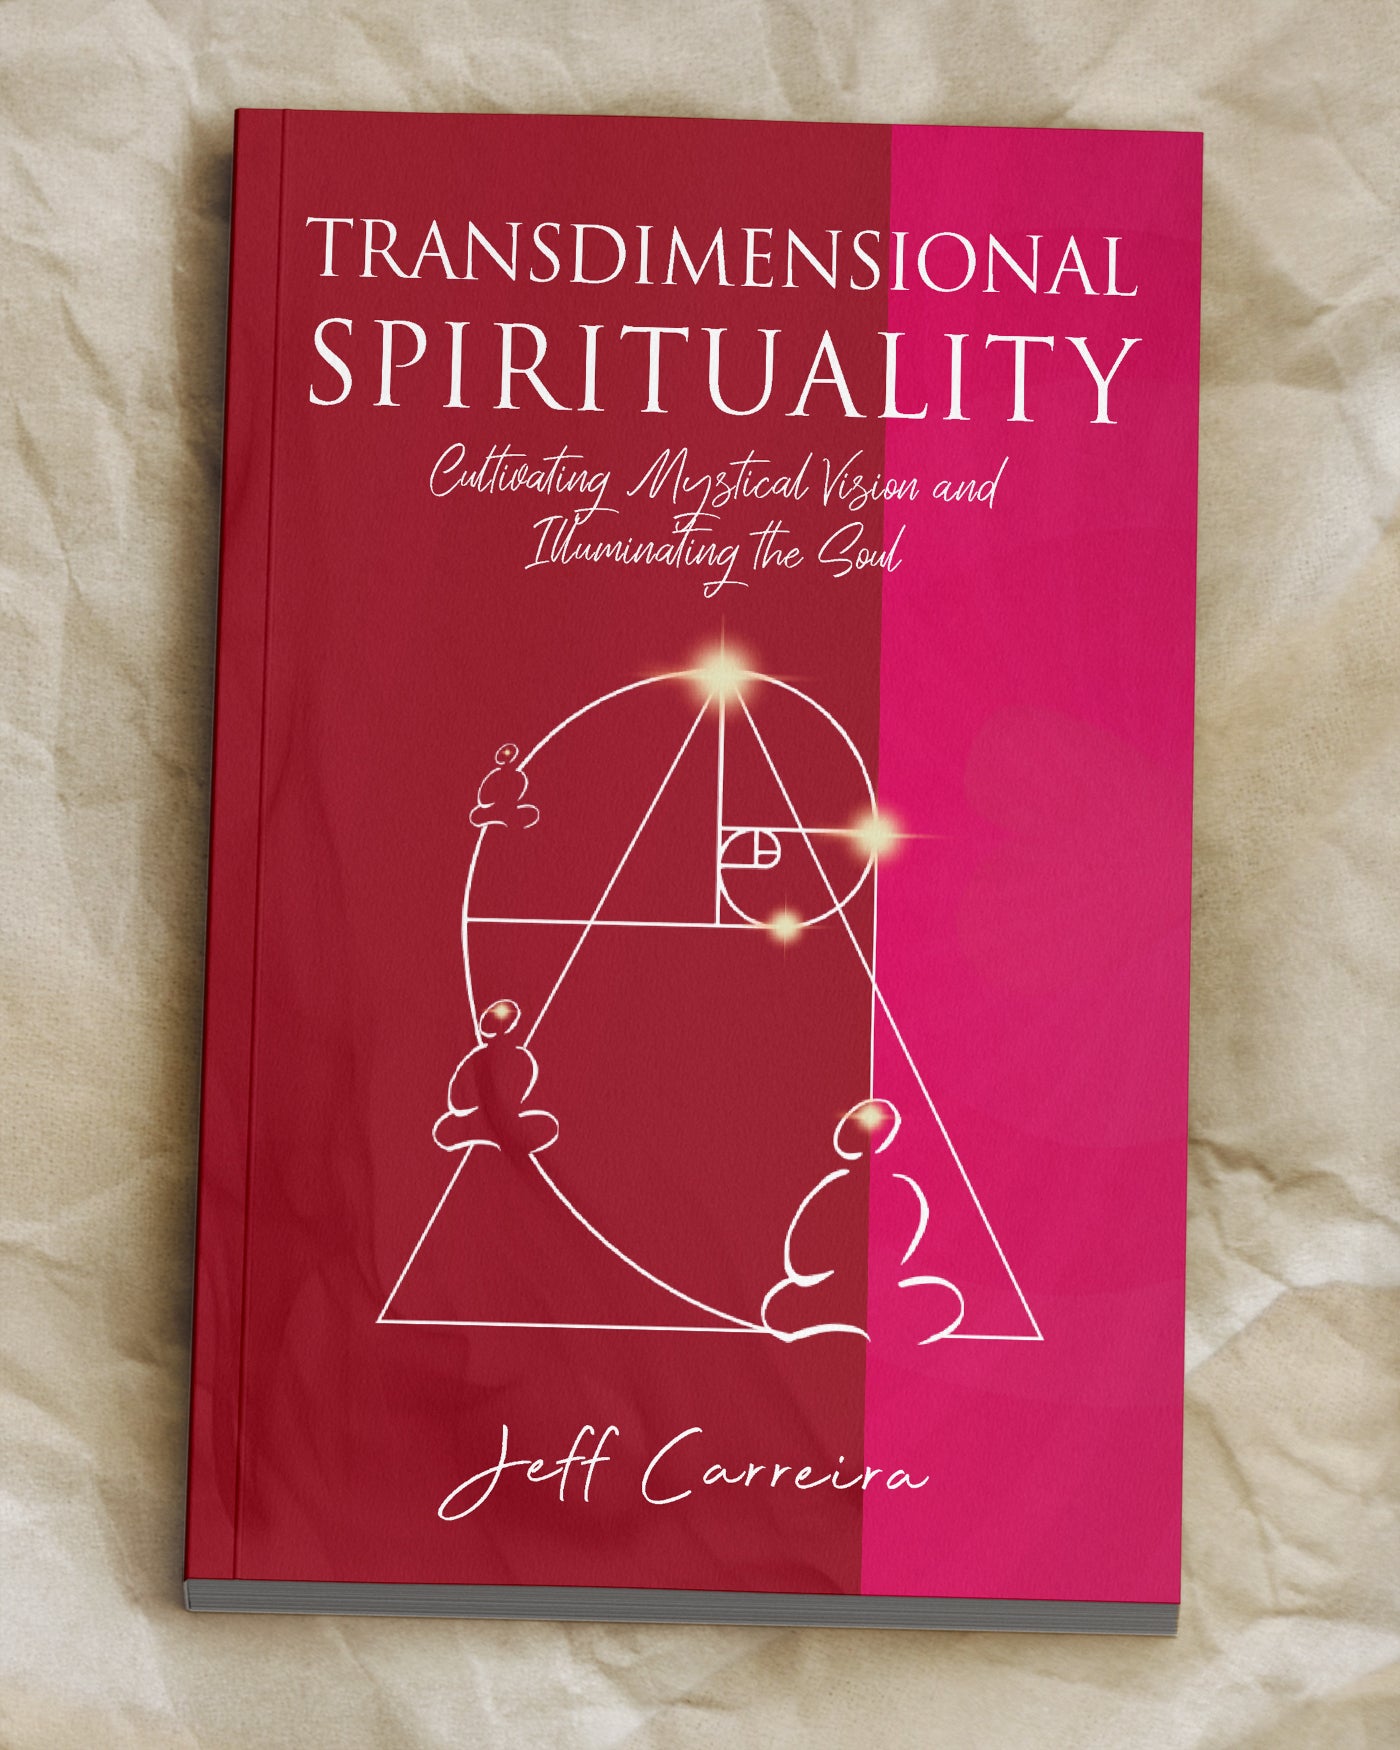 Transdimensional Spirituality: Cultivating Mystical Vision and Illuminating the Soul